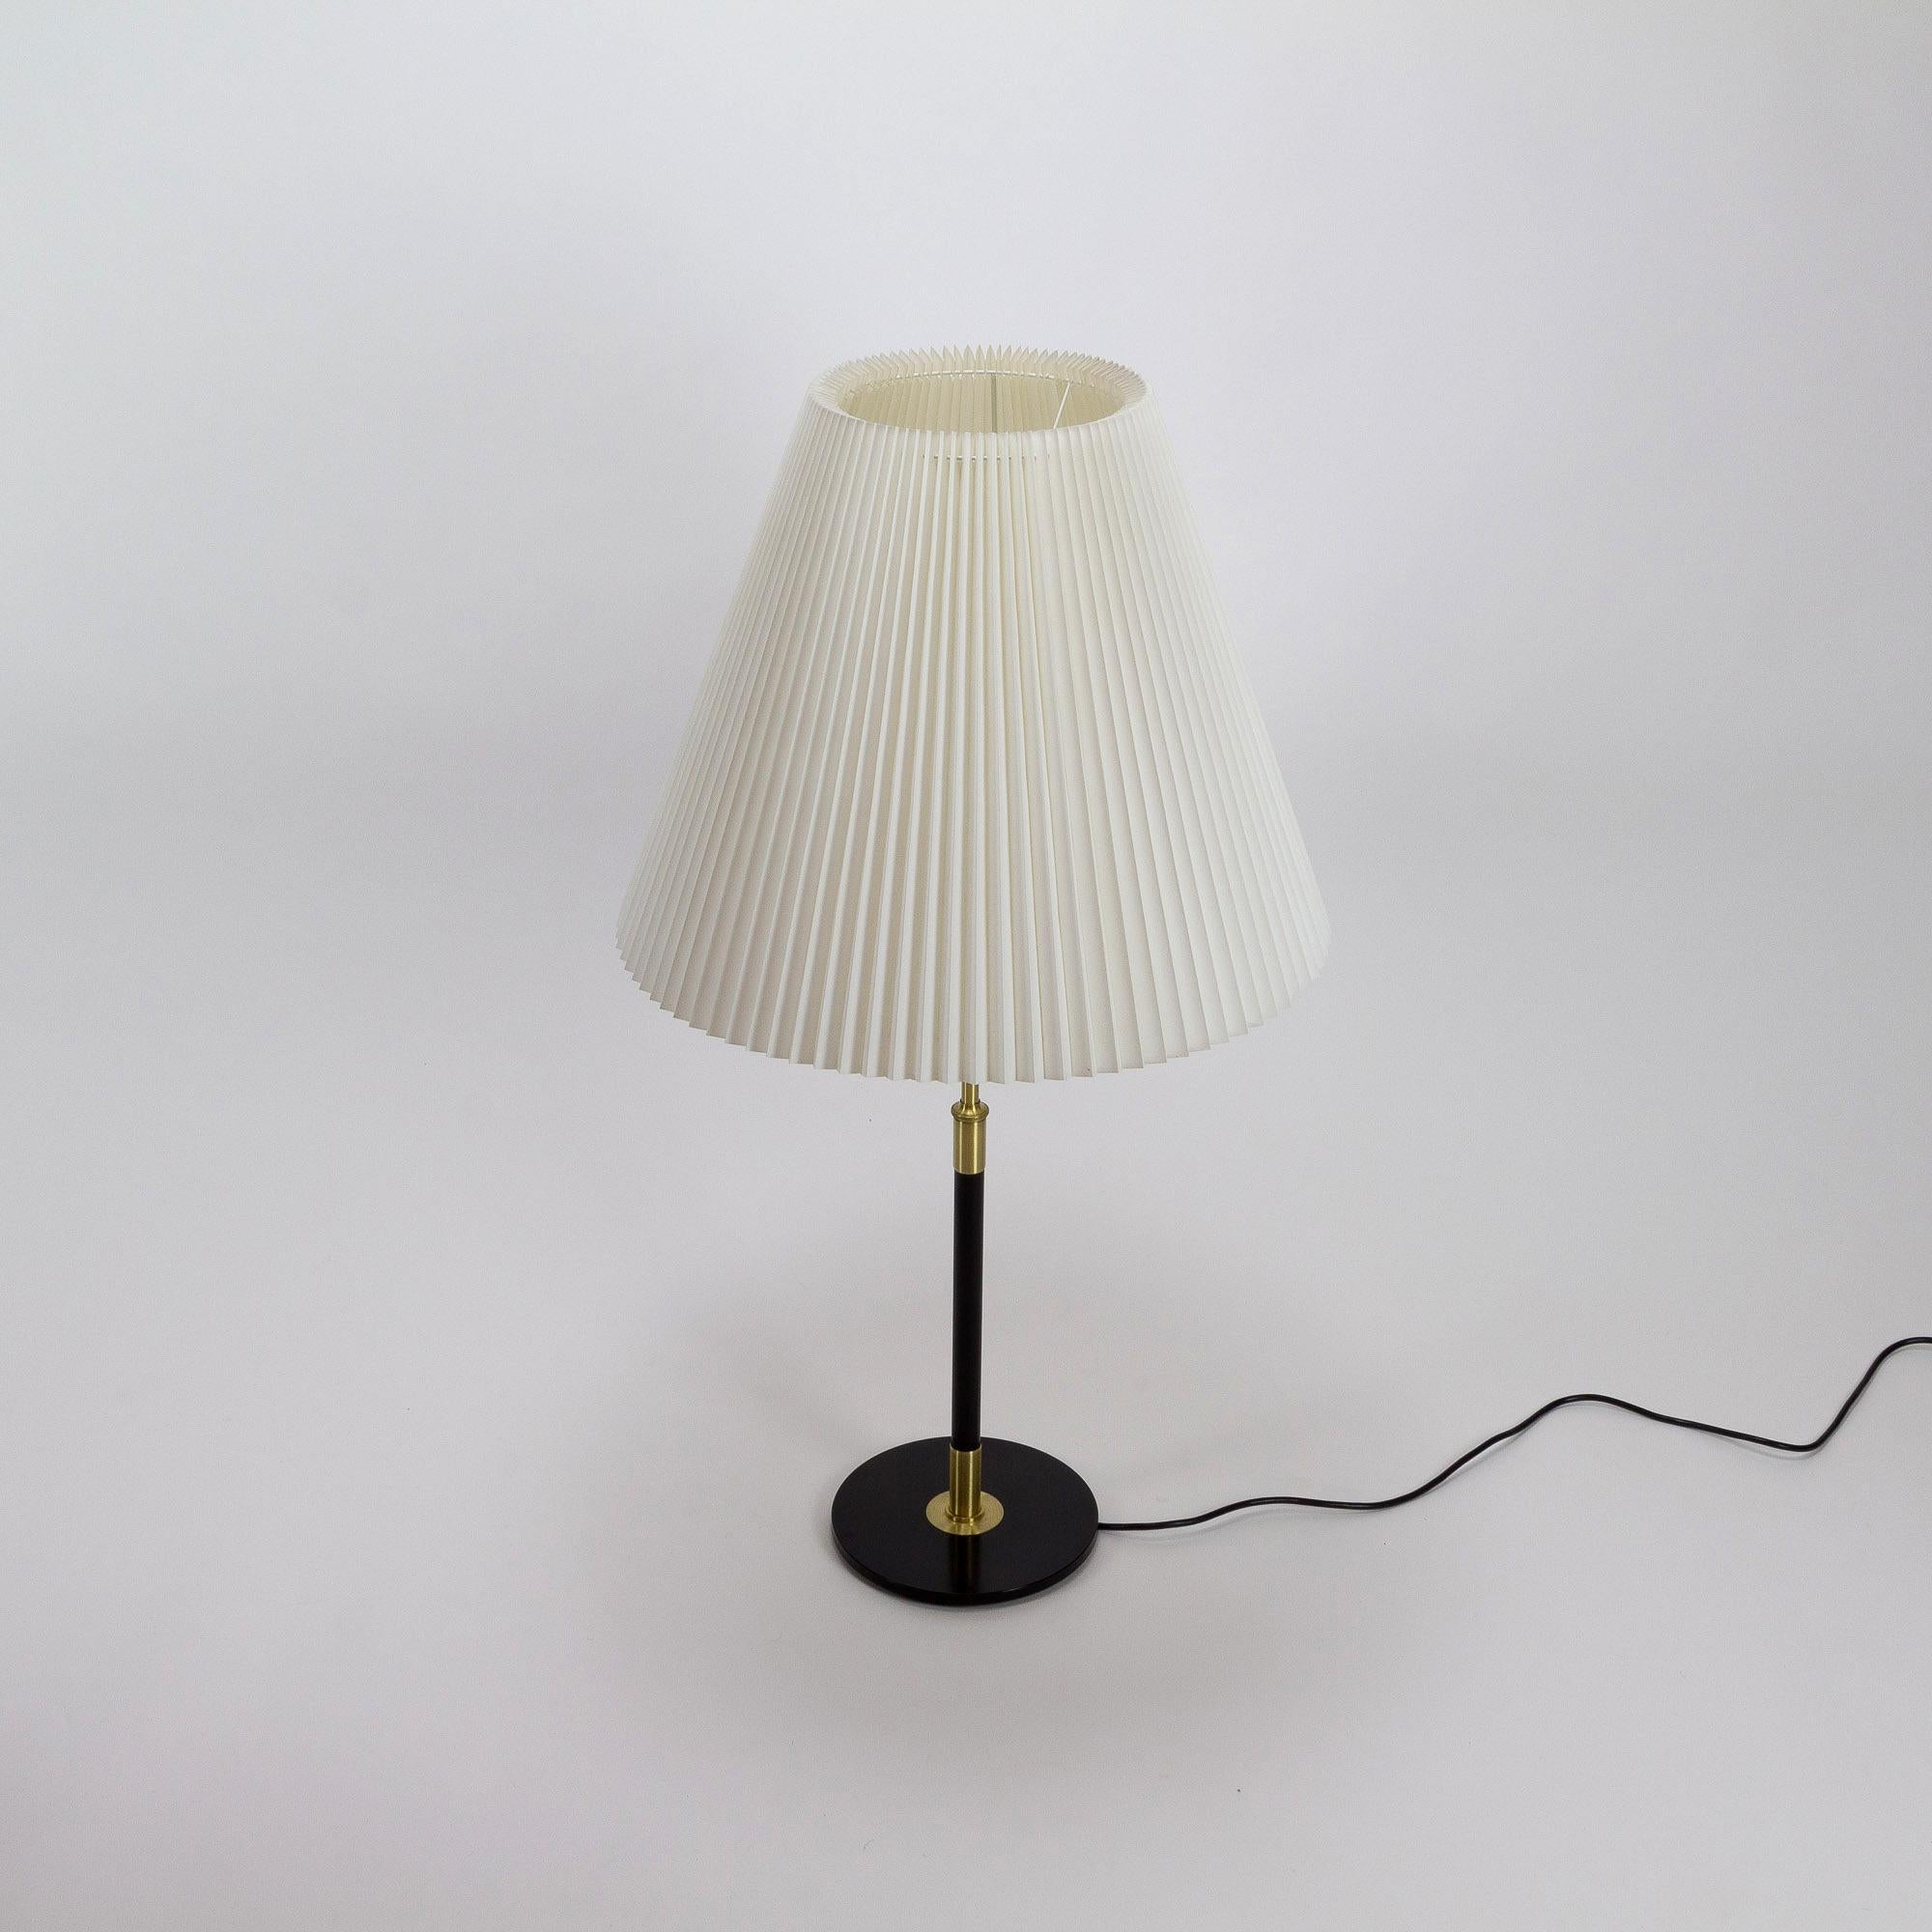 Late 20th Century Model 352 Adjustable Table Lamp by Aage Petersen for Le Klint, Denmark, 1970s